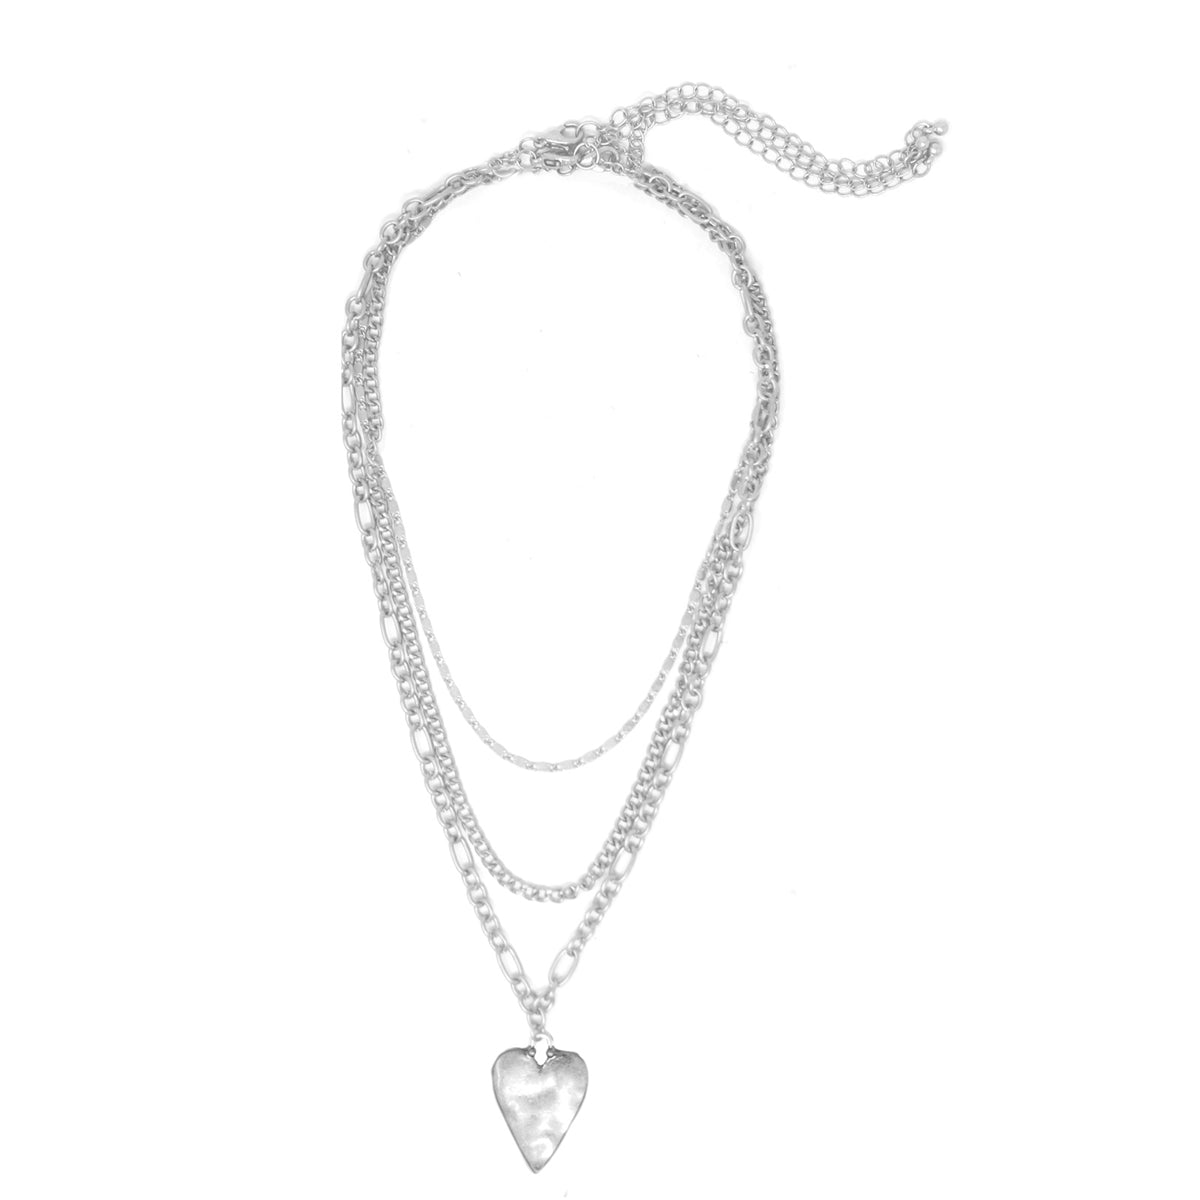 Worn Silver Heart Layered Necklace